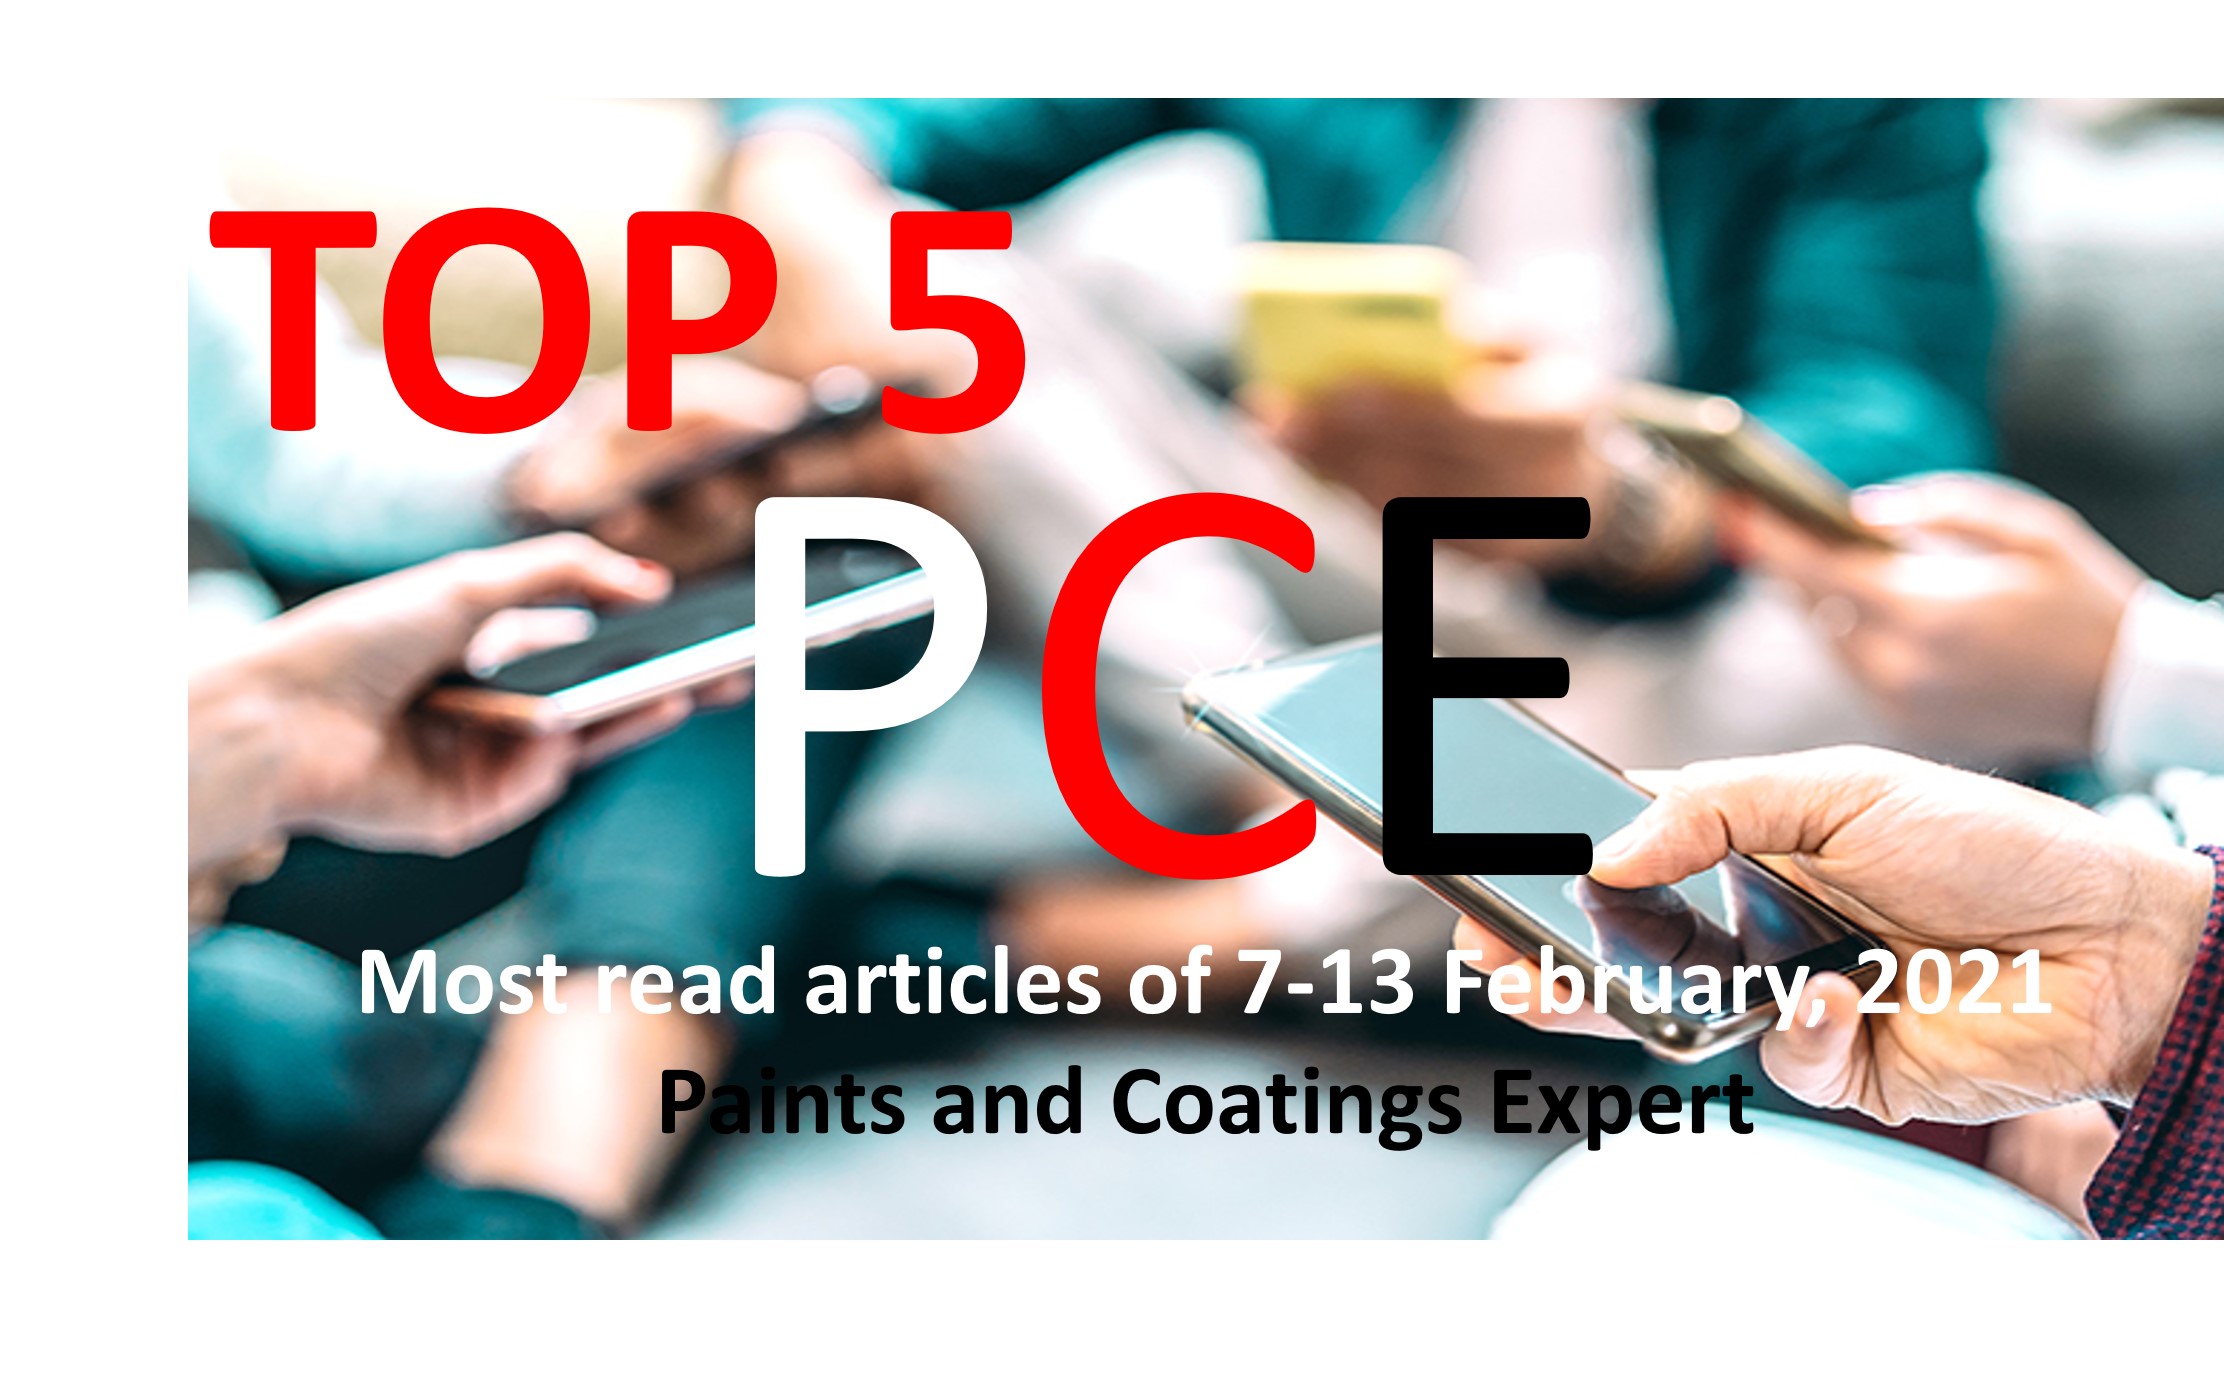 Top 5 Most read articles from 7-13 February, 2021 on Paints and Coatings Expert